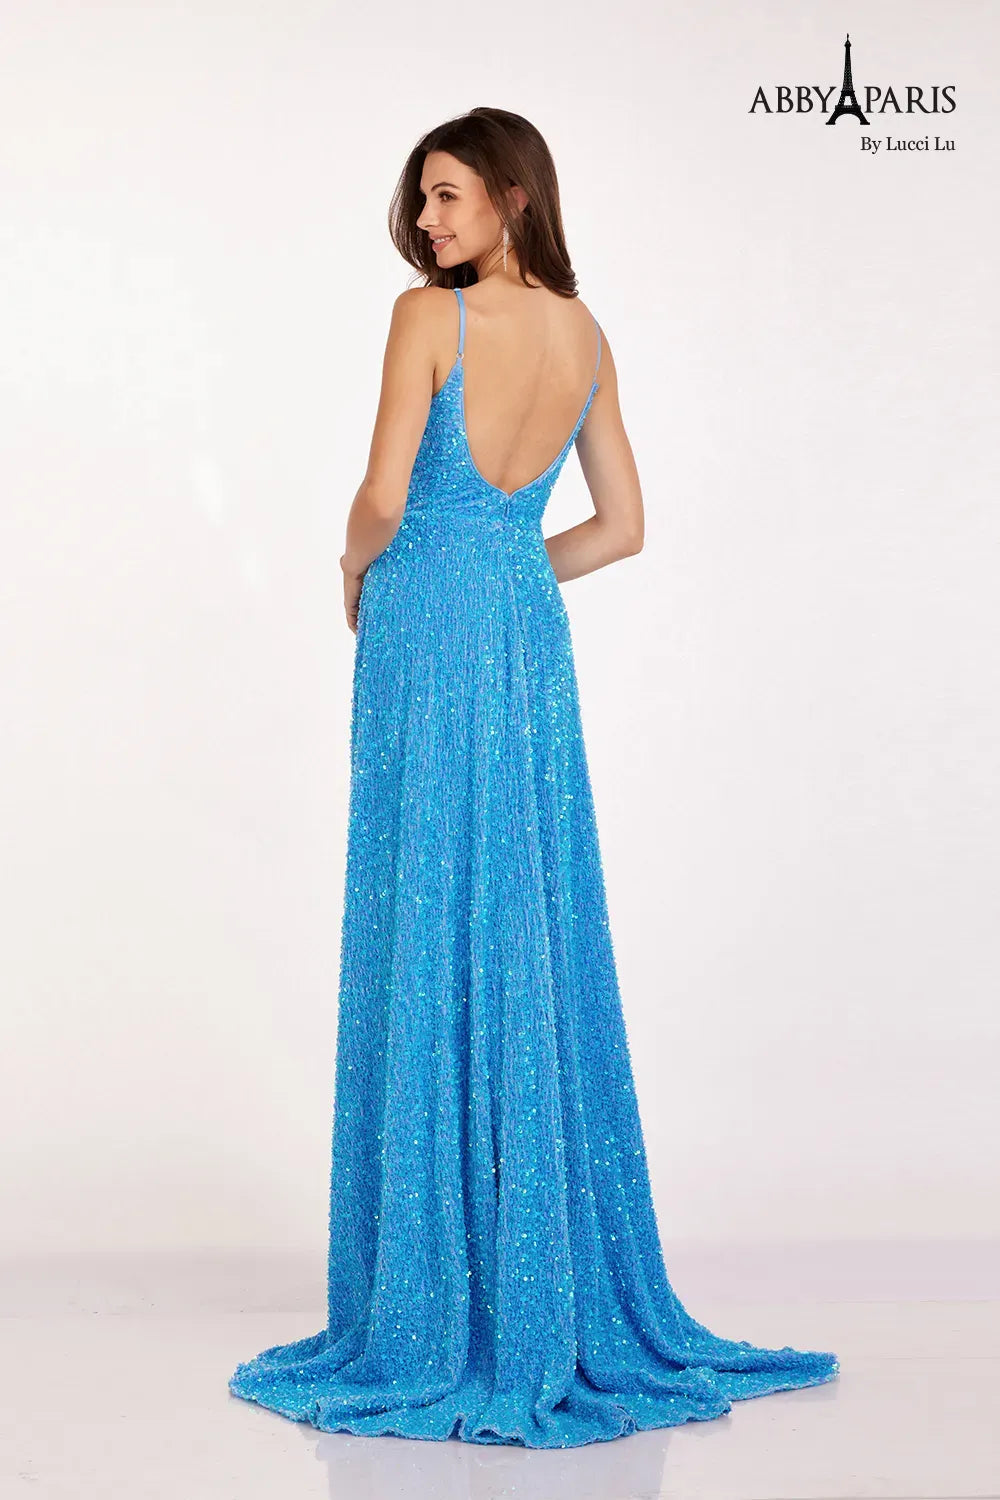 Be the center of attention in the Abby Paris 90247 A Line Velvet Sequin Ballgown. This stunning dress features a V-neckline and A-line silhouette that flatters any figure. The velvet fabric and sequin embellishments add a touch of luxury, while the maxi slit and pockets provide practicality. Perfect for prom or any formal event.  Sizes: 0-20  Colors: Dolphin Blue, Magenta